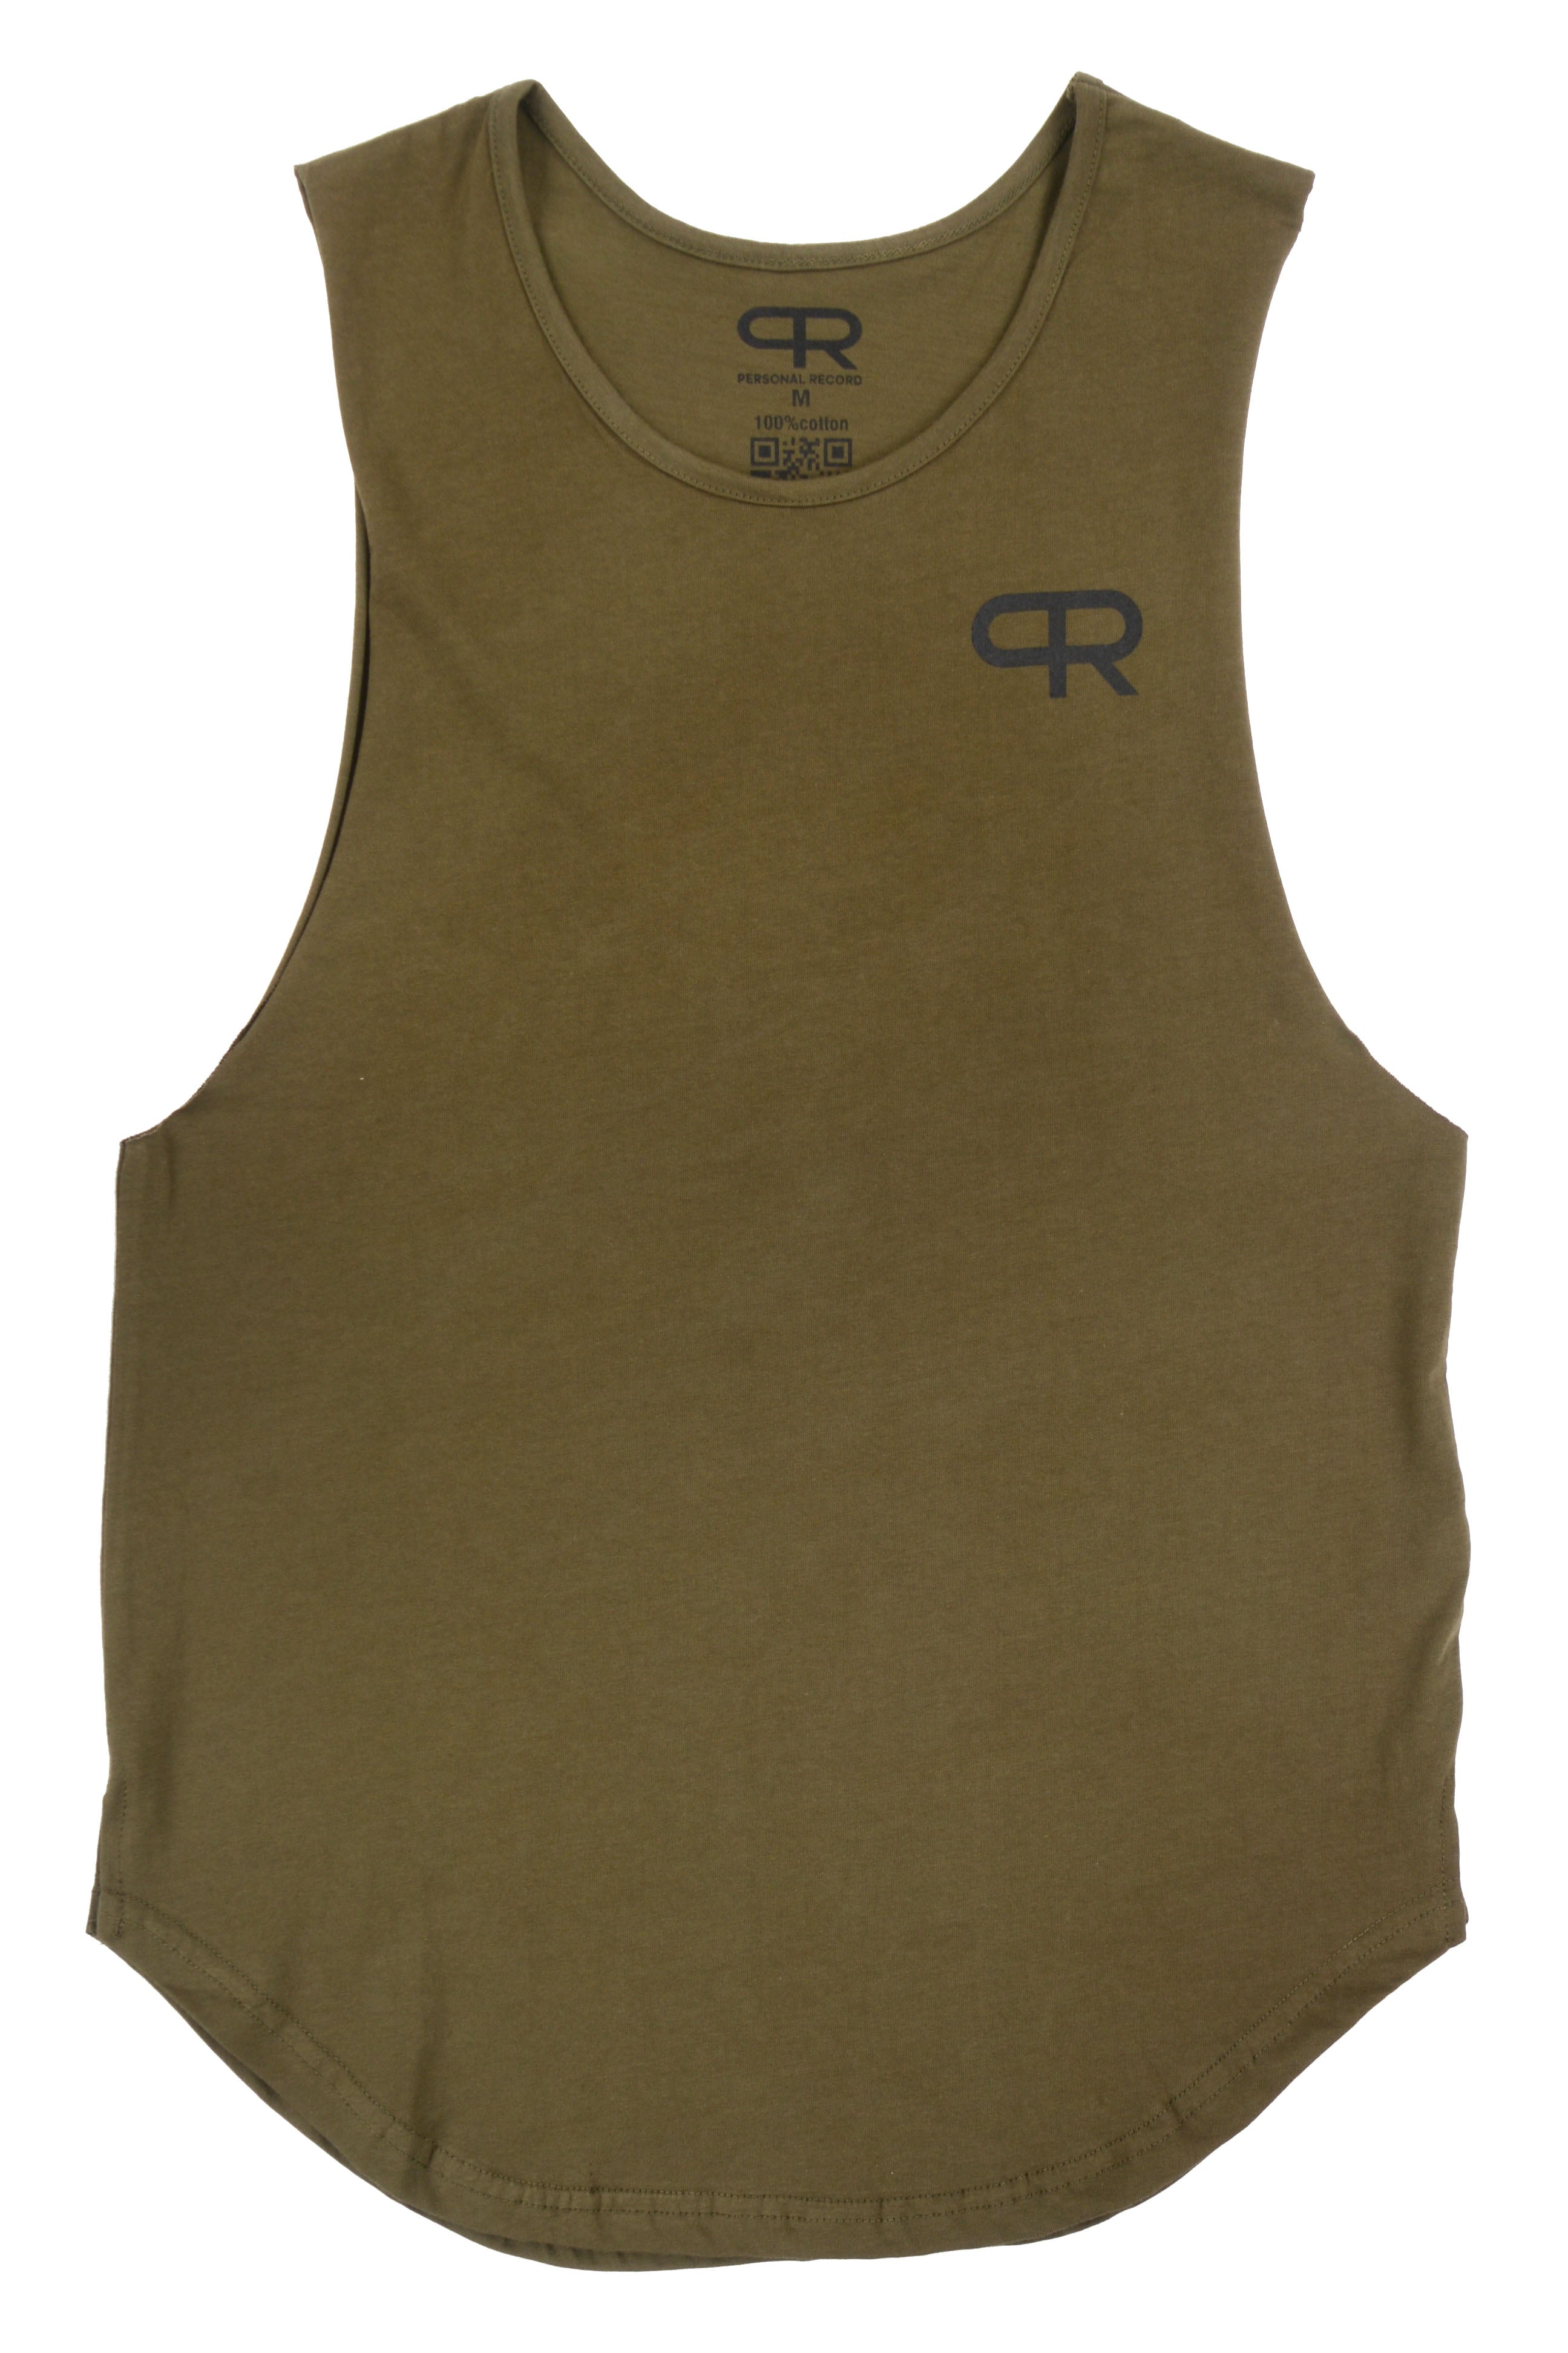 Personal Record Muscle Tank - PR309 - Olive